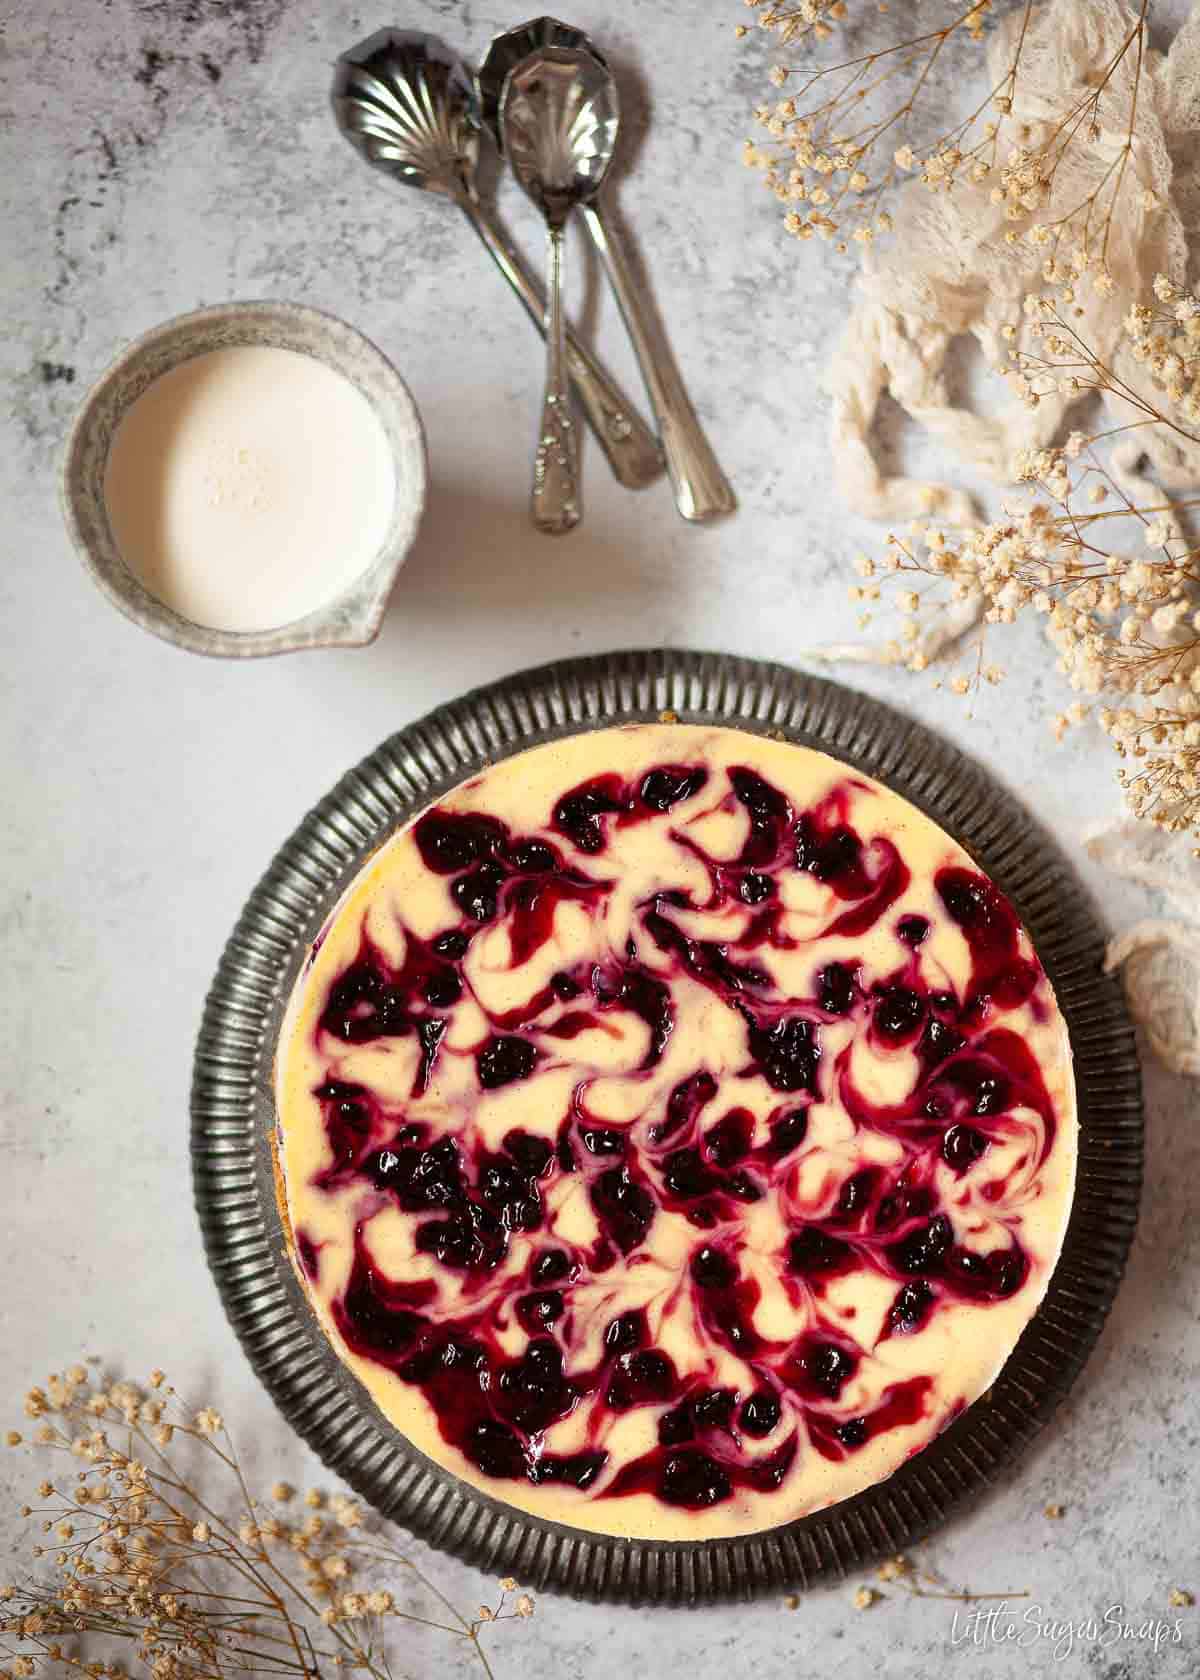 A marbled blackcurrant cheesecake on a plate with a jug of pouring cream at the side.